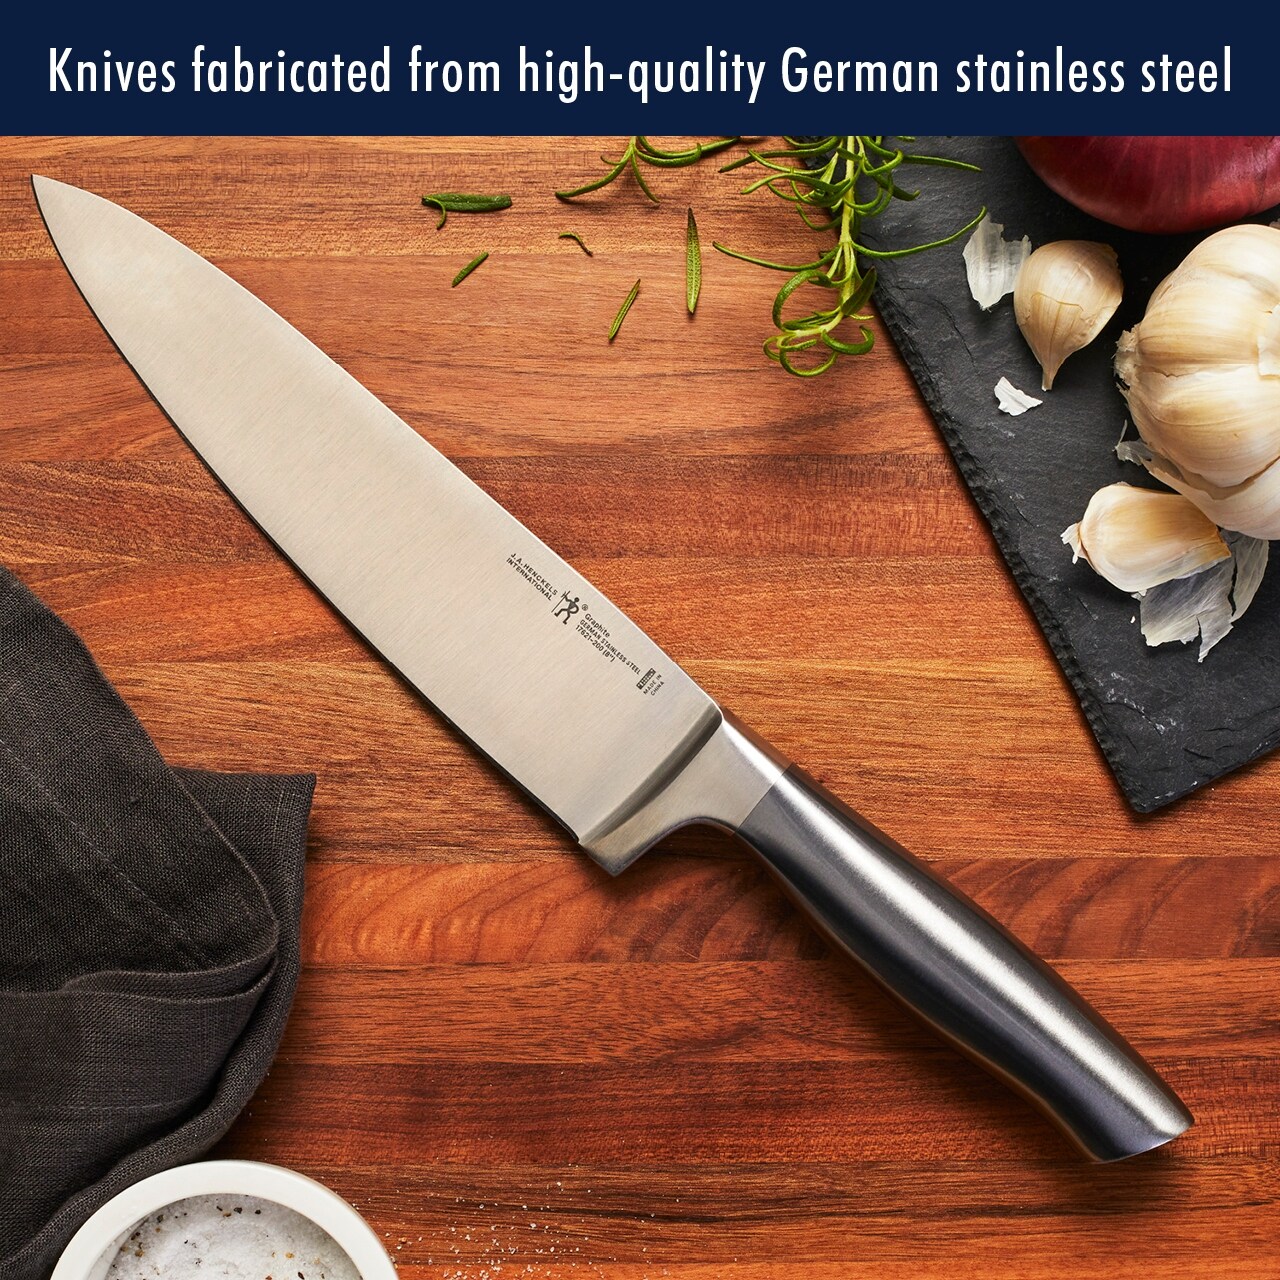 https://ak1.ostkcdn.com/images/products/is/images/direct/a84e790a829d7d4acc7c1c8455edeb1b86907ab5/HENCKELS-Graphite-13-pc-Knife-Set-with-Block%2C-Kitchen-Knife-Sharpener%2C-Chef-Knife%2C-Steak-Knife%2C-Black%2C-Stainless-Steel.jpg